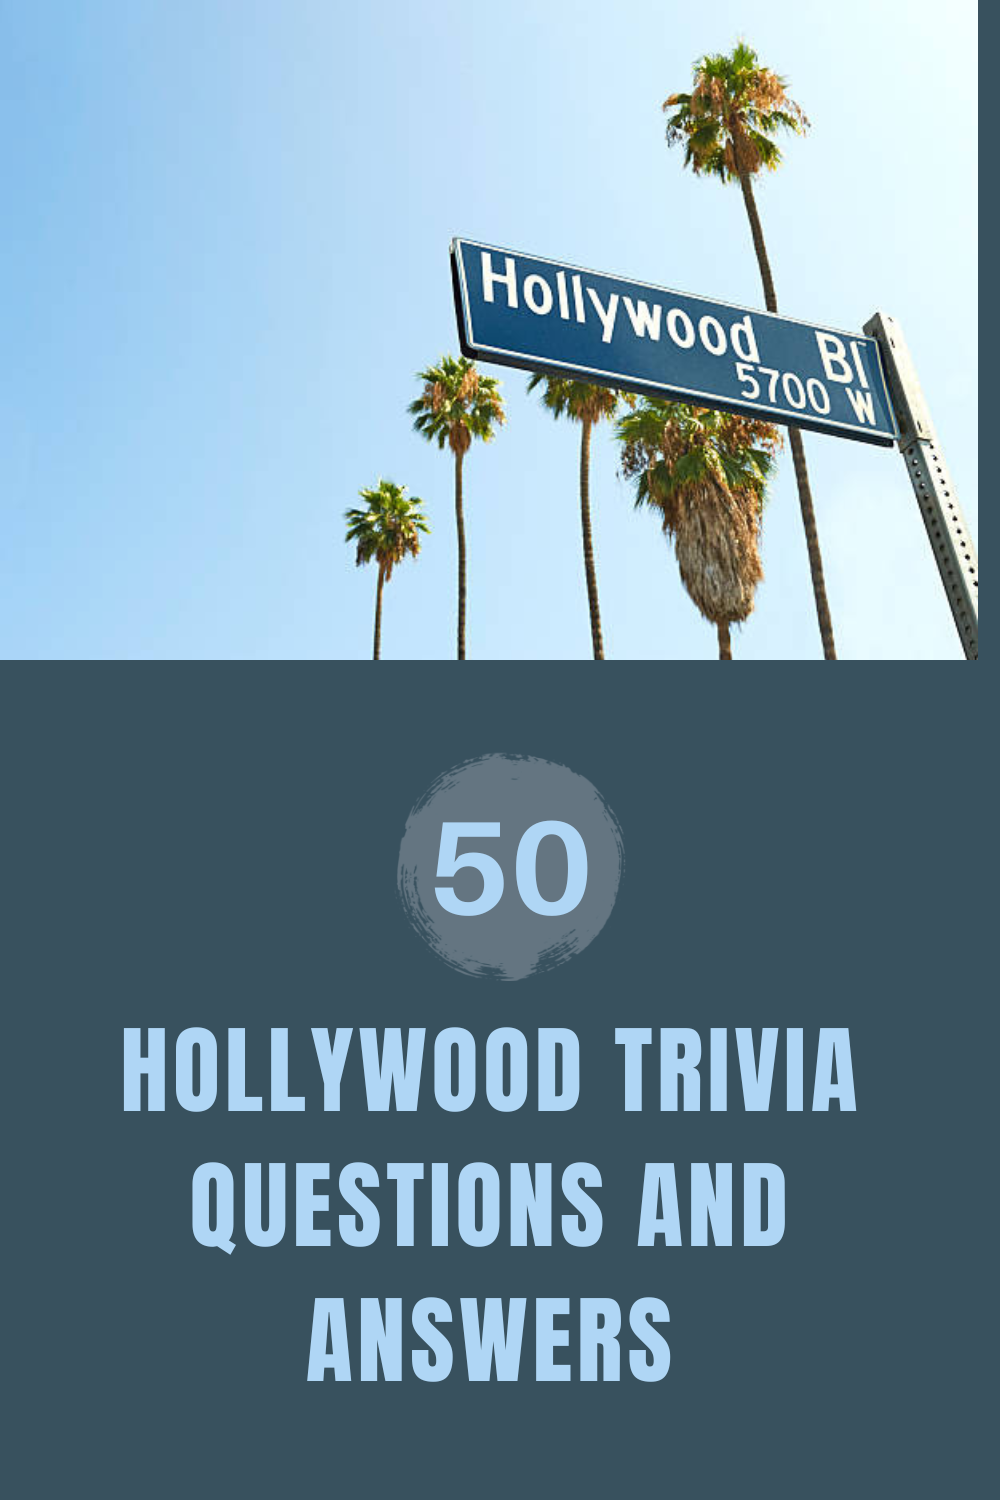 Hollywood Trivia Questions